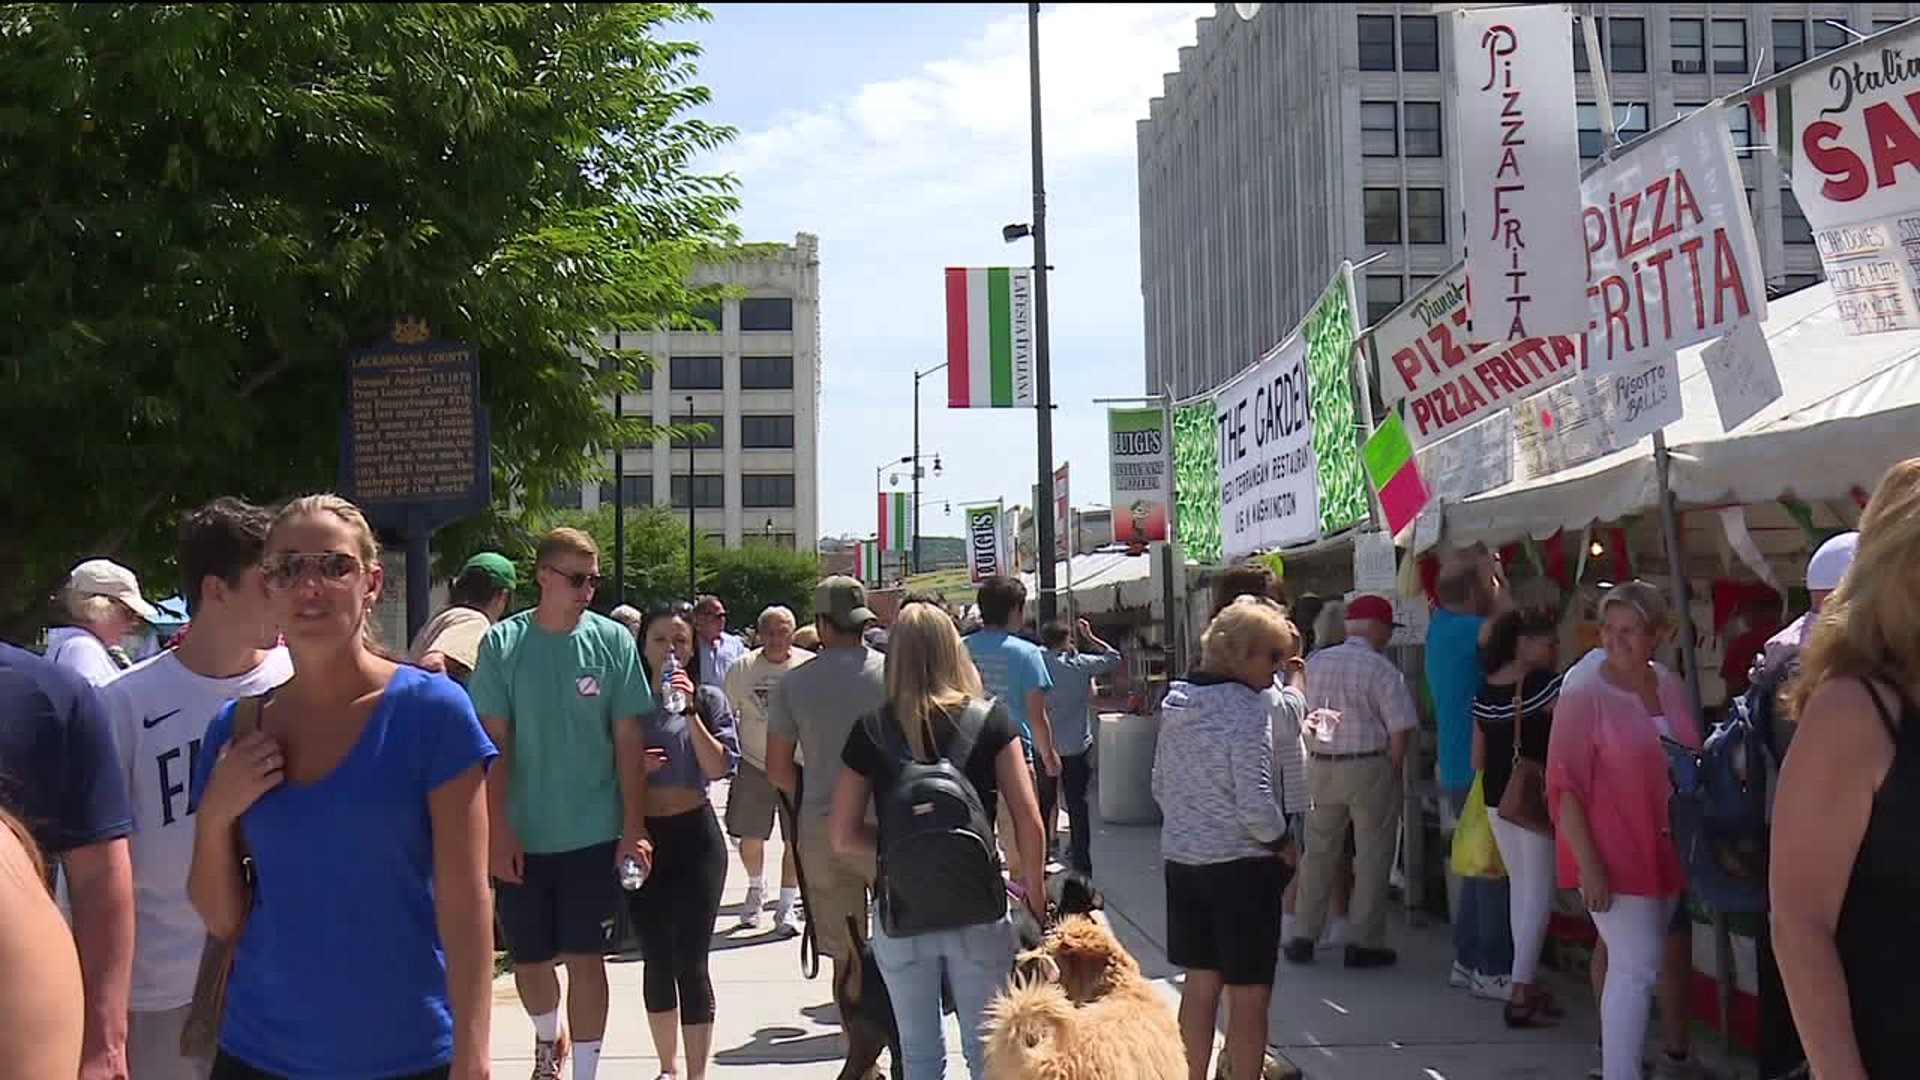 The popular event draws thousands of people to downtown Scranton for ethnic foods, music, crafts, and other events.